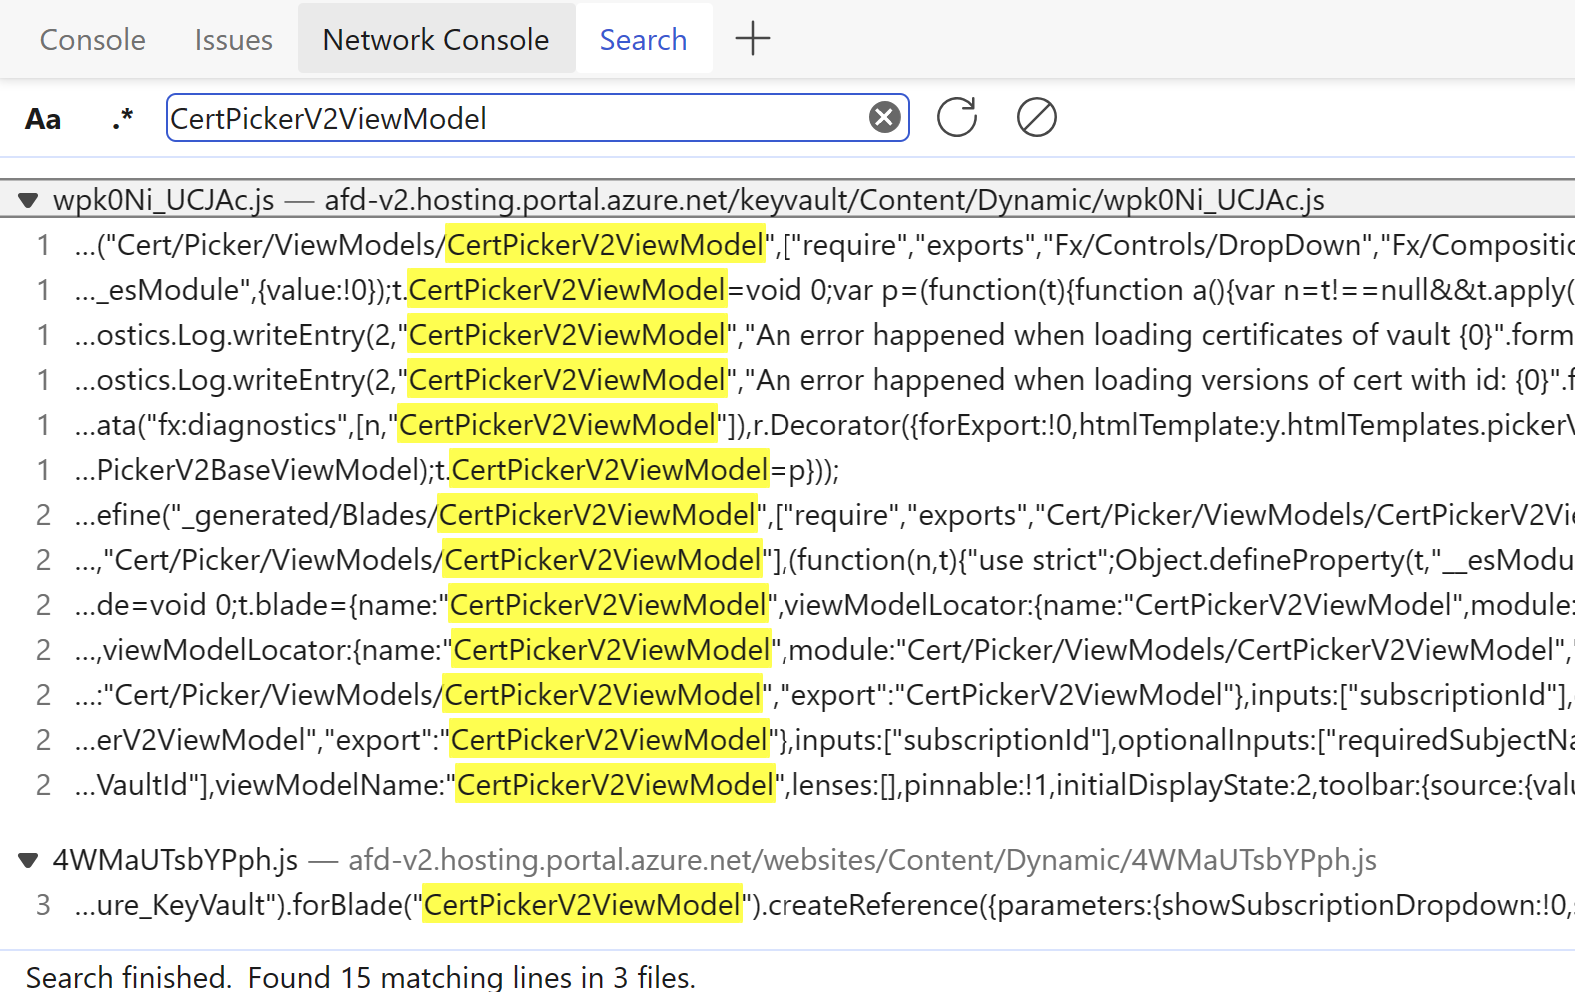 How to uncover the names and parameters of blades in Azure Portal